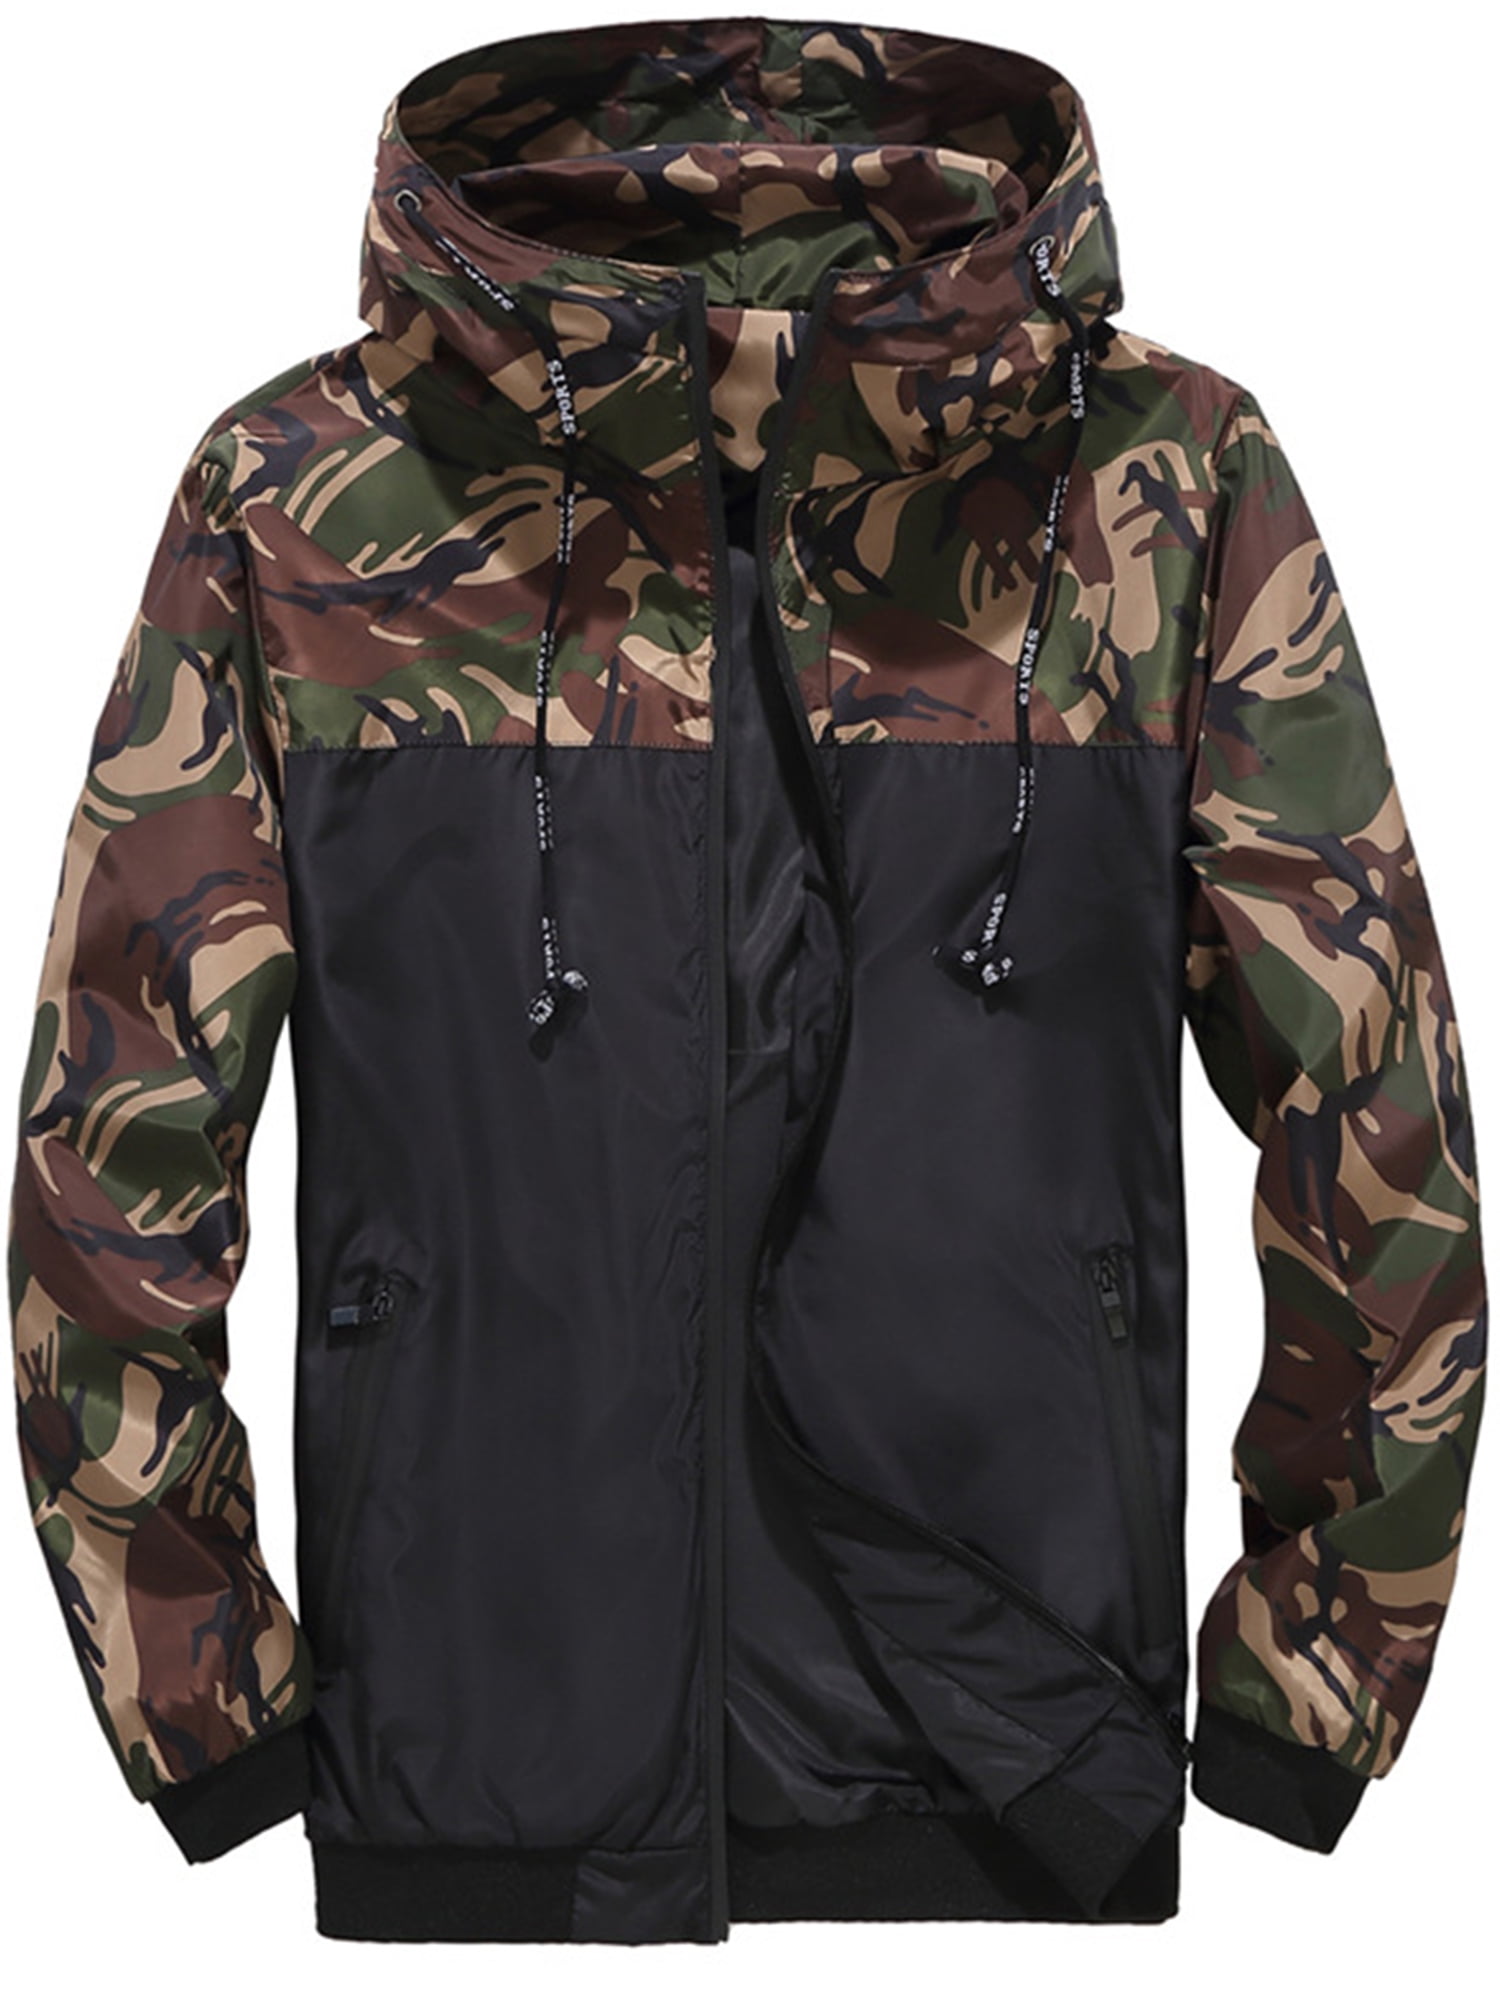 Men Womens Hooded Jacket Camo Coat Breathable Outerwear Pockets Lovers New M-3XL